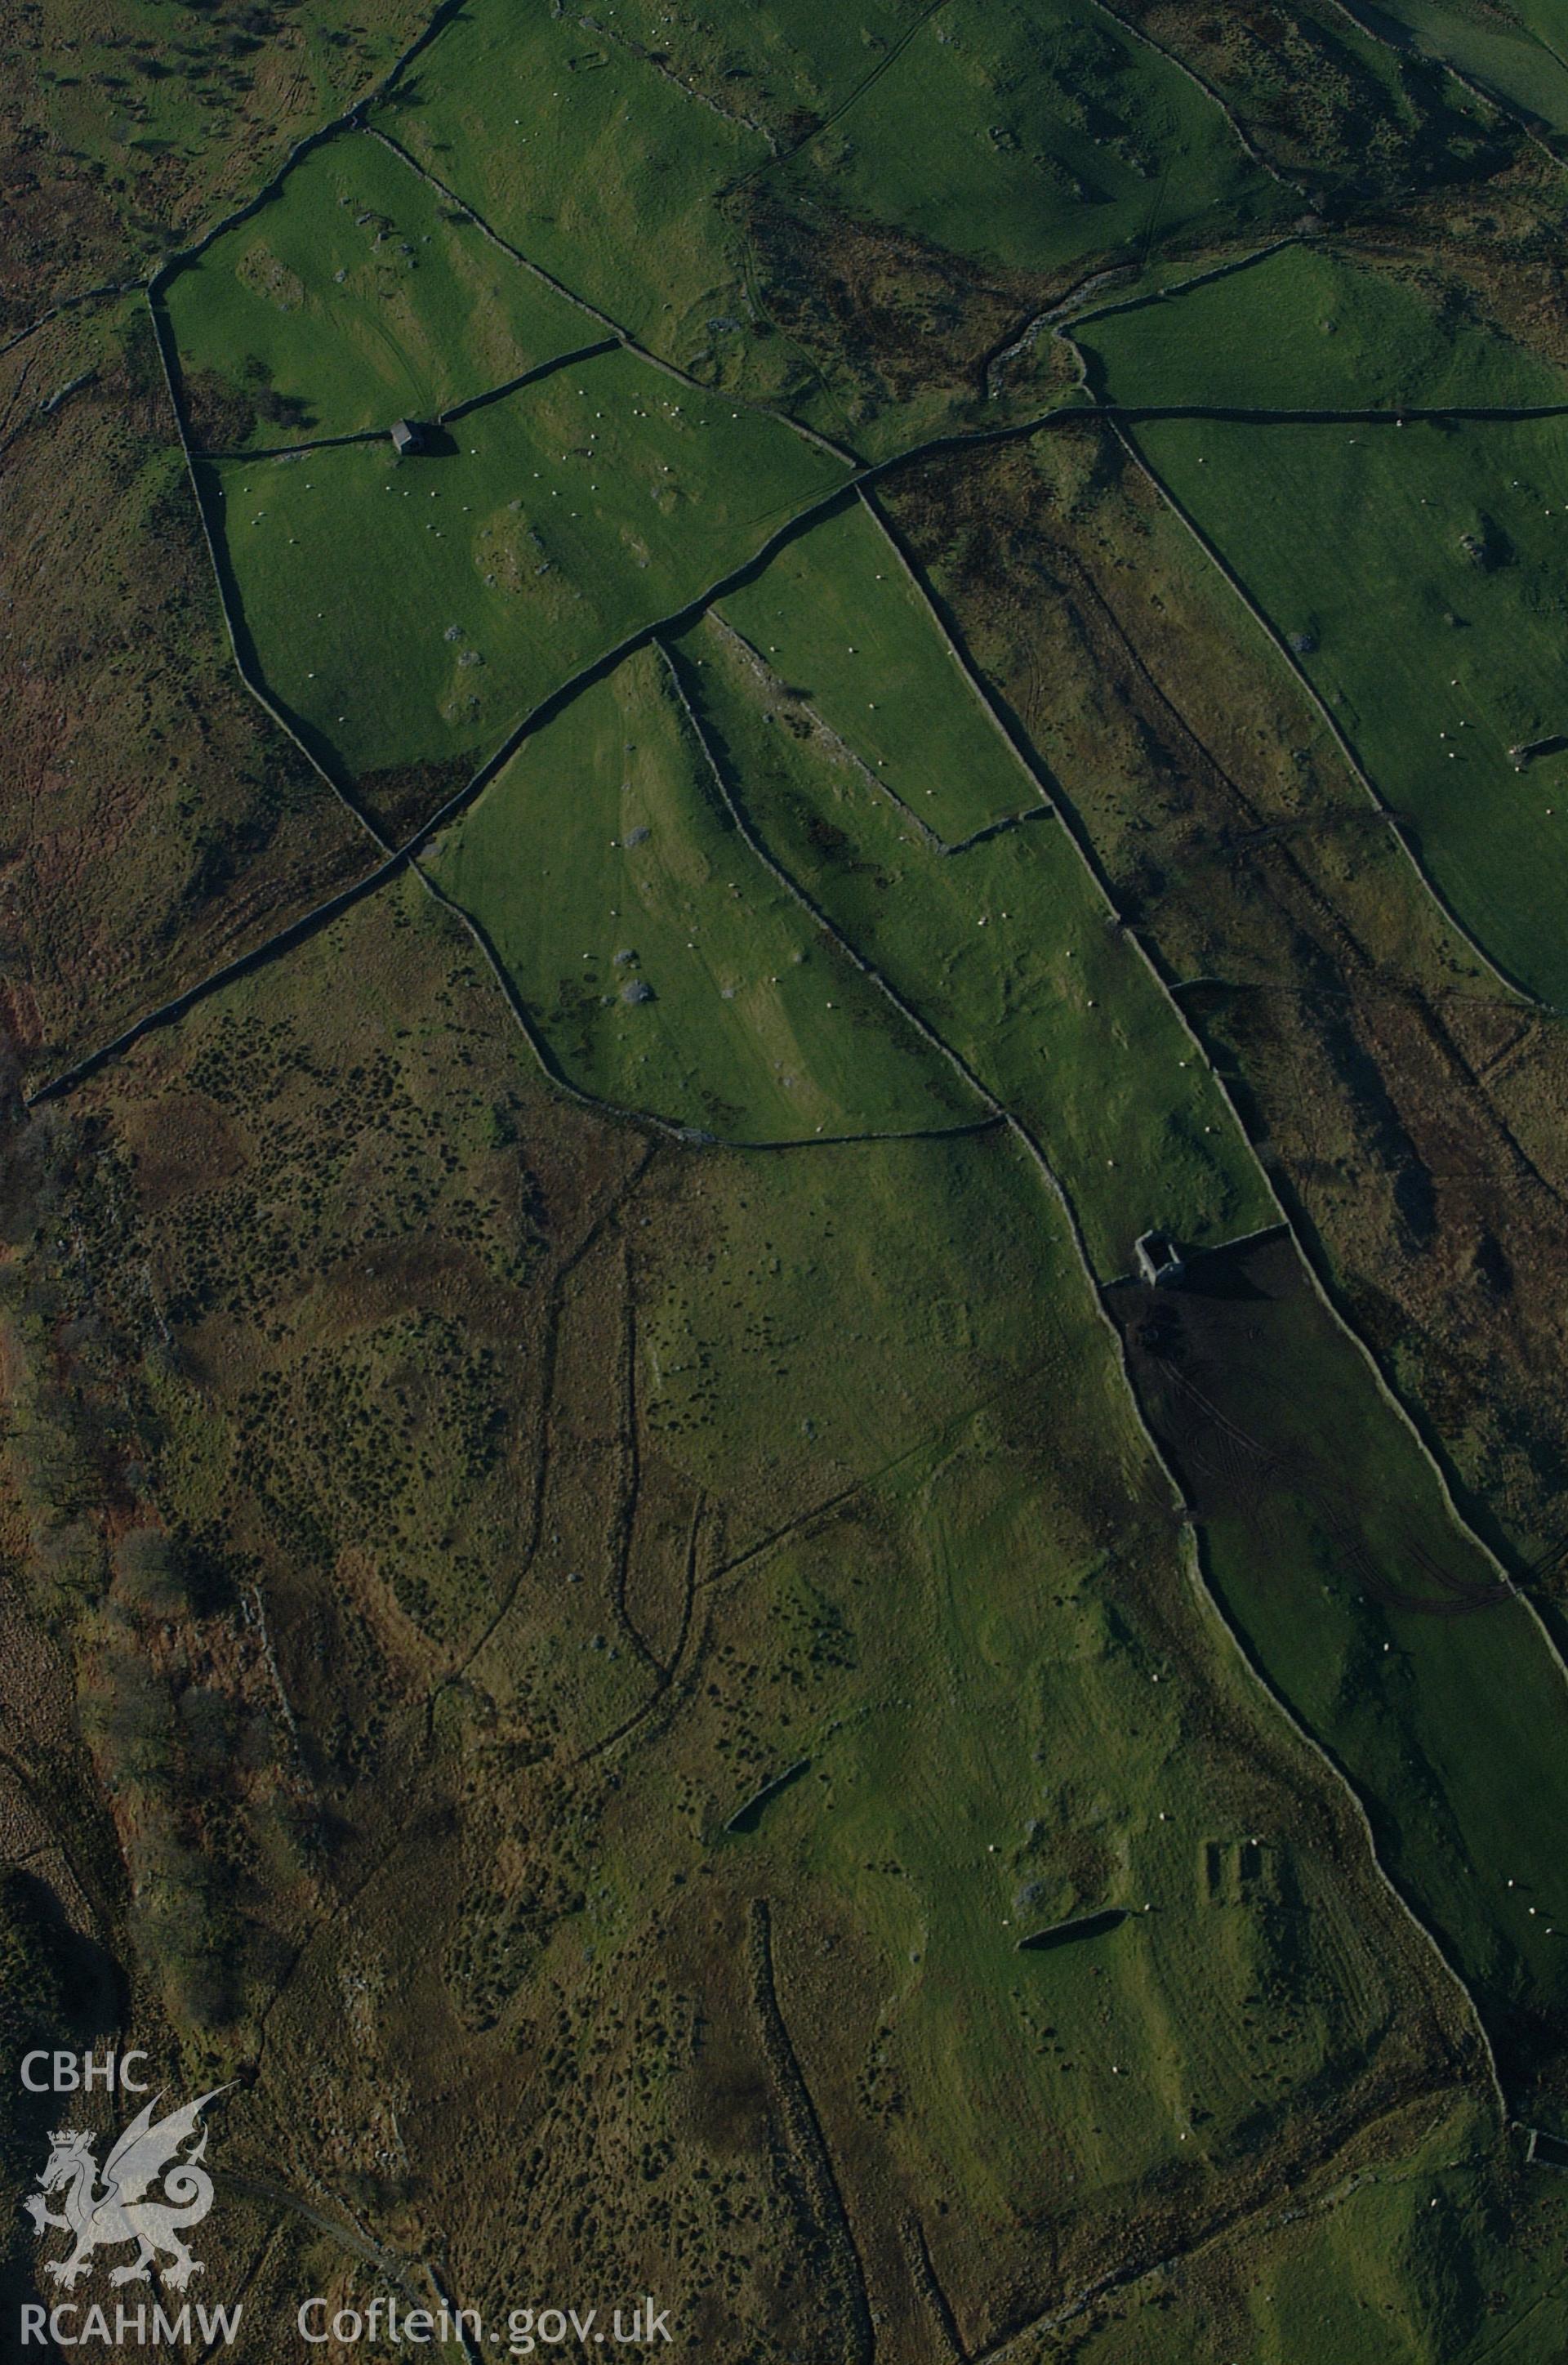 RCAHMW colour oblique aerial photograph of Yr Onen Deserted Rural Settlement taken on 24/01/2005 by Toby Driver